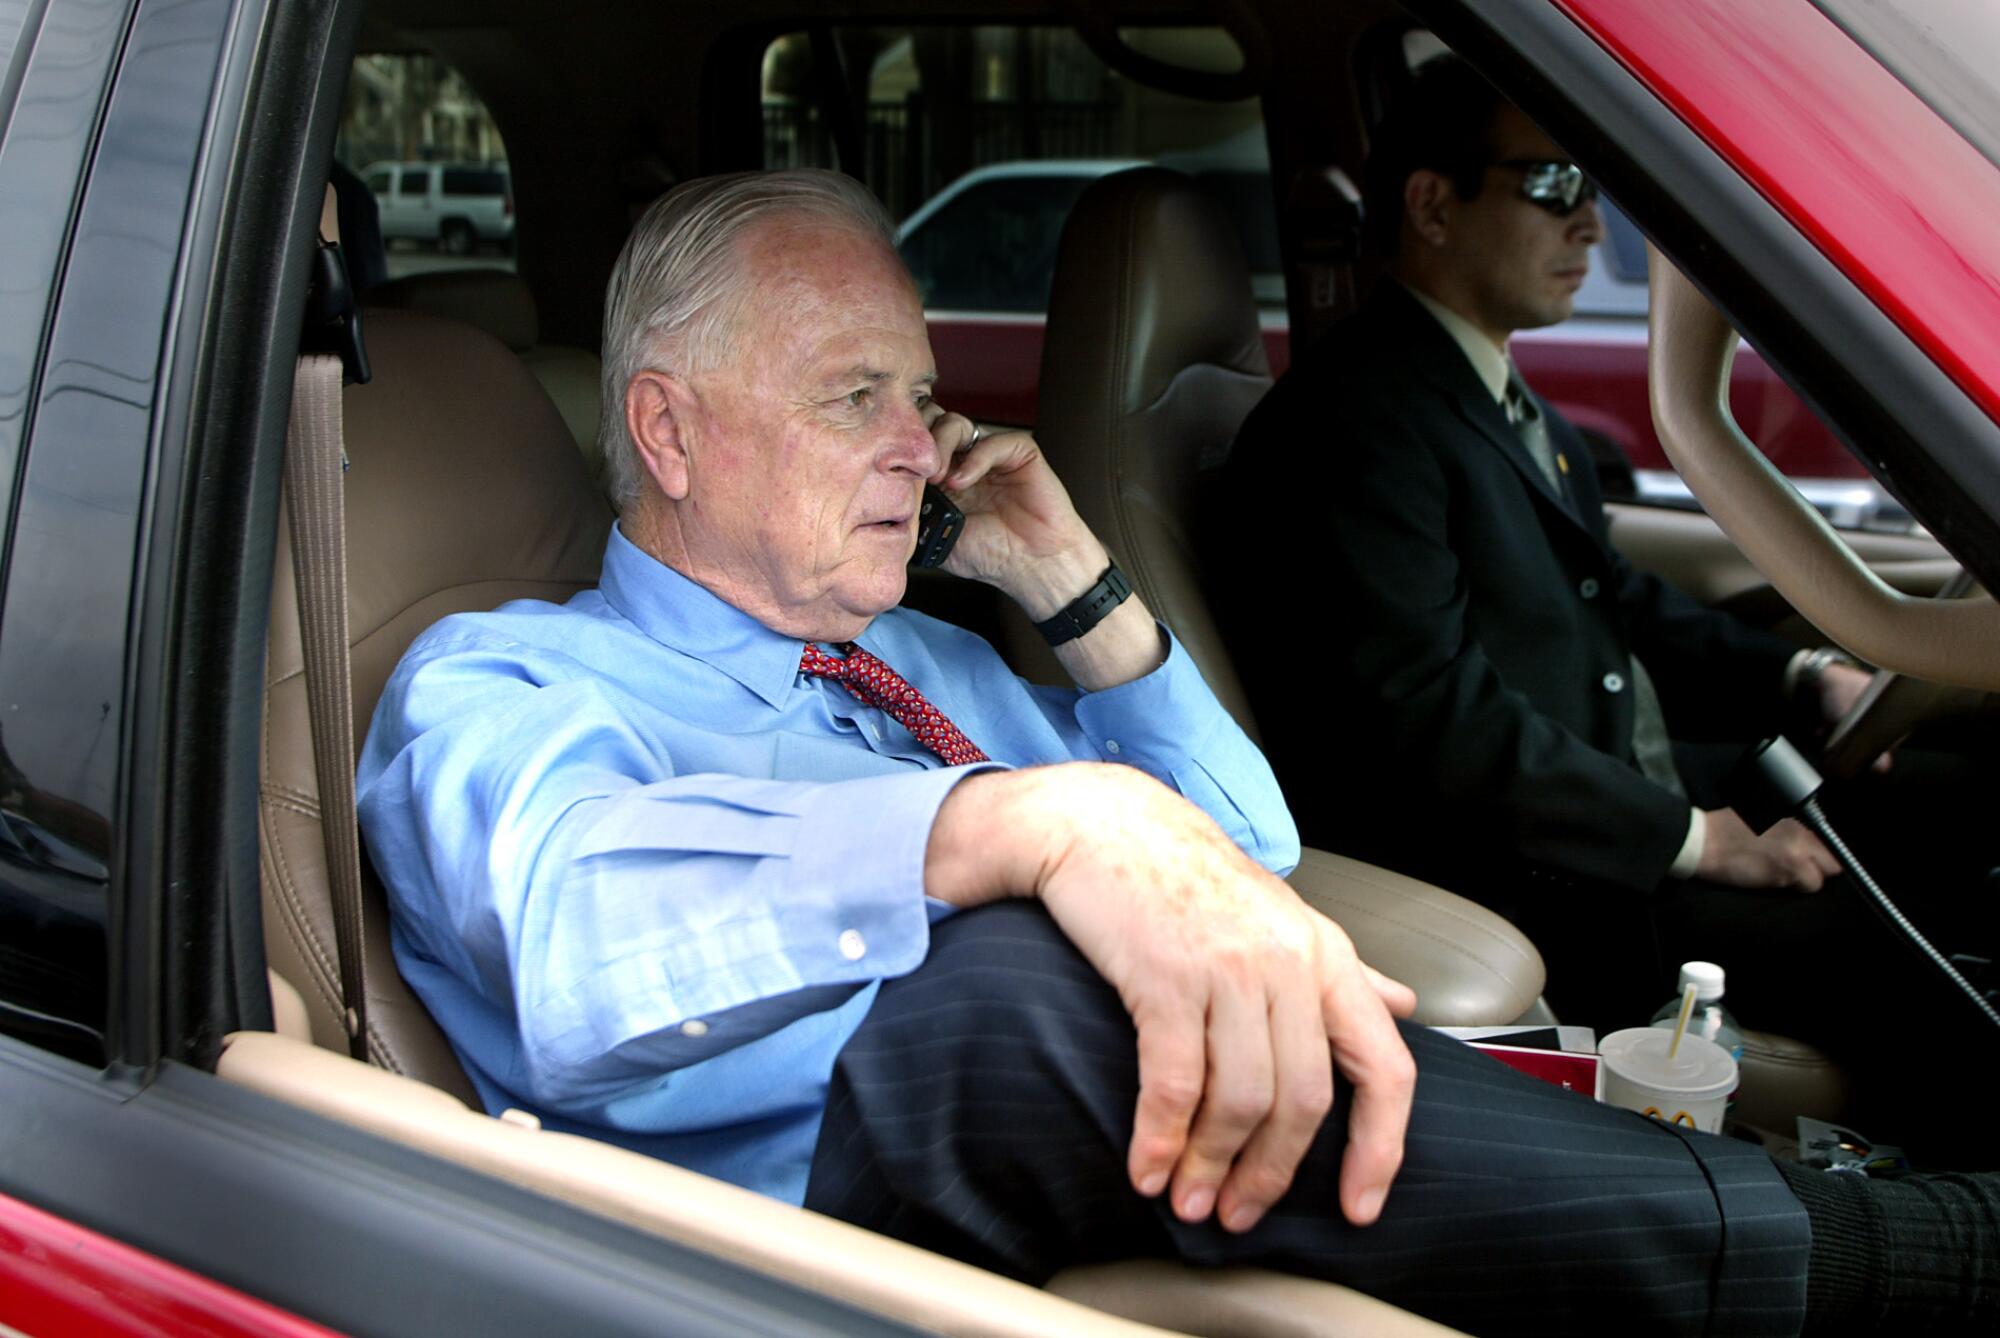 Richard Riordan talks on a cellphone sitting in the passenger seat of a car